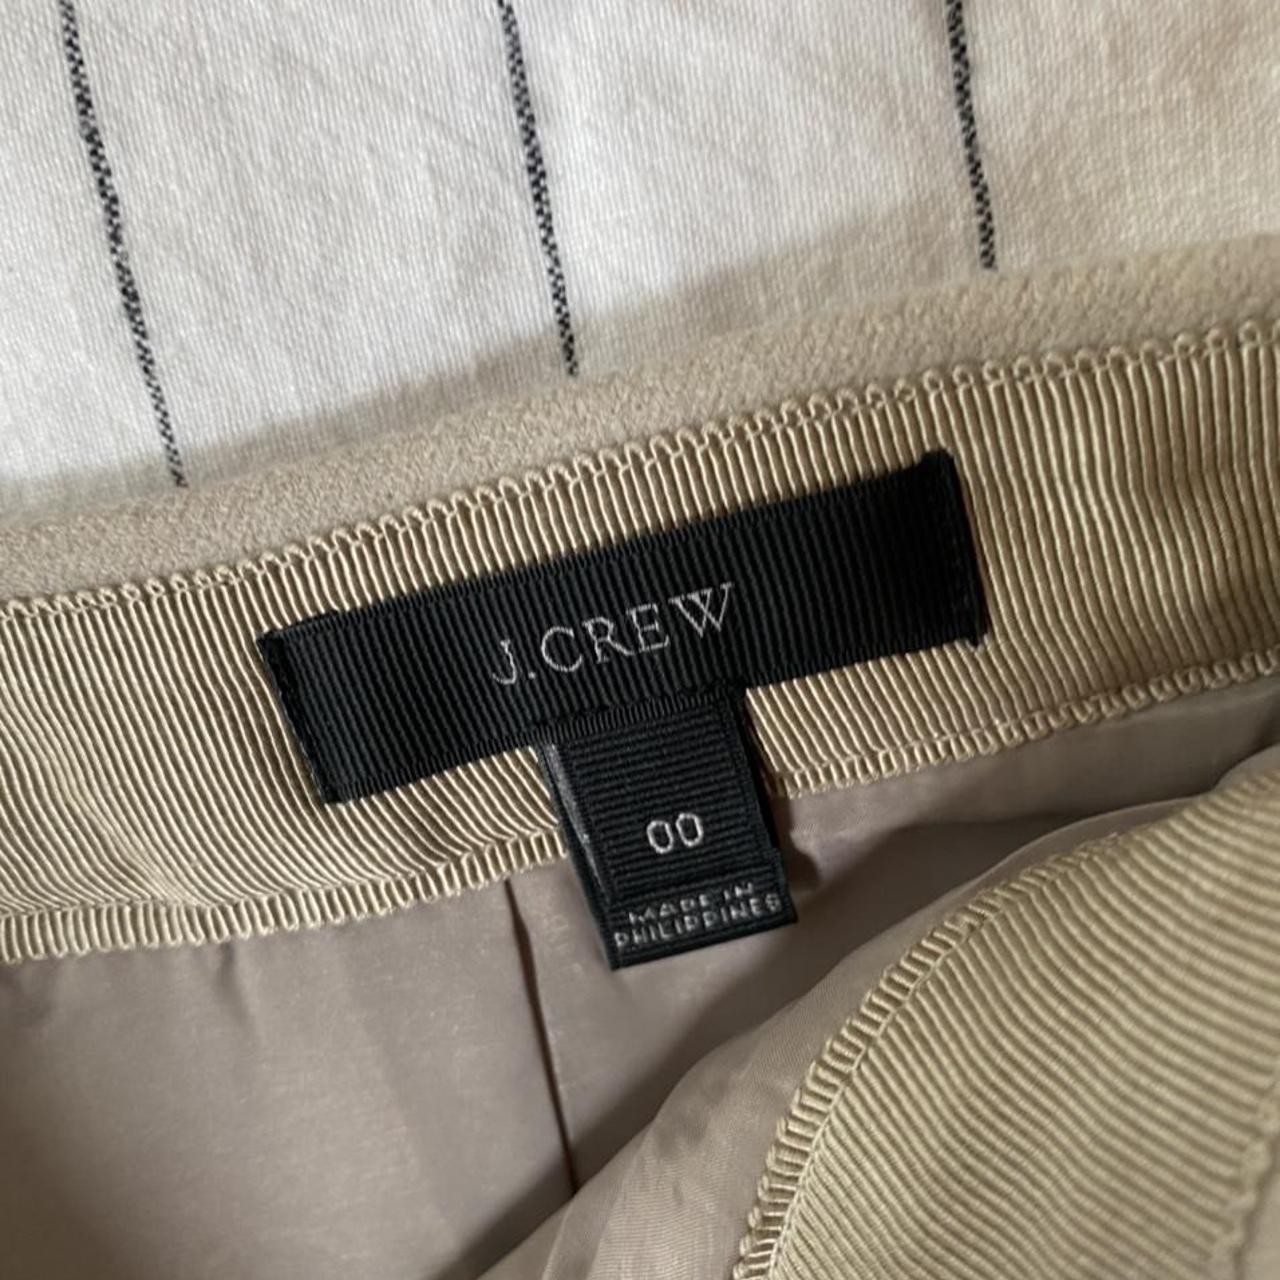 Product Image 2 - J Crew Wool Skirt Size